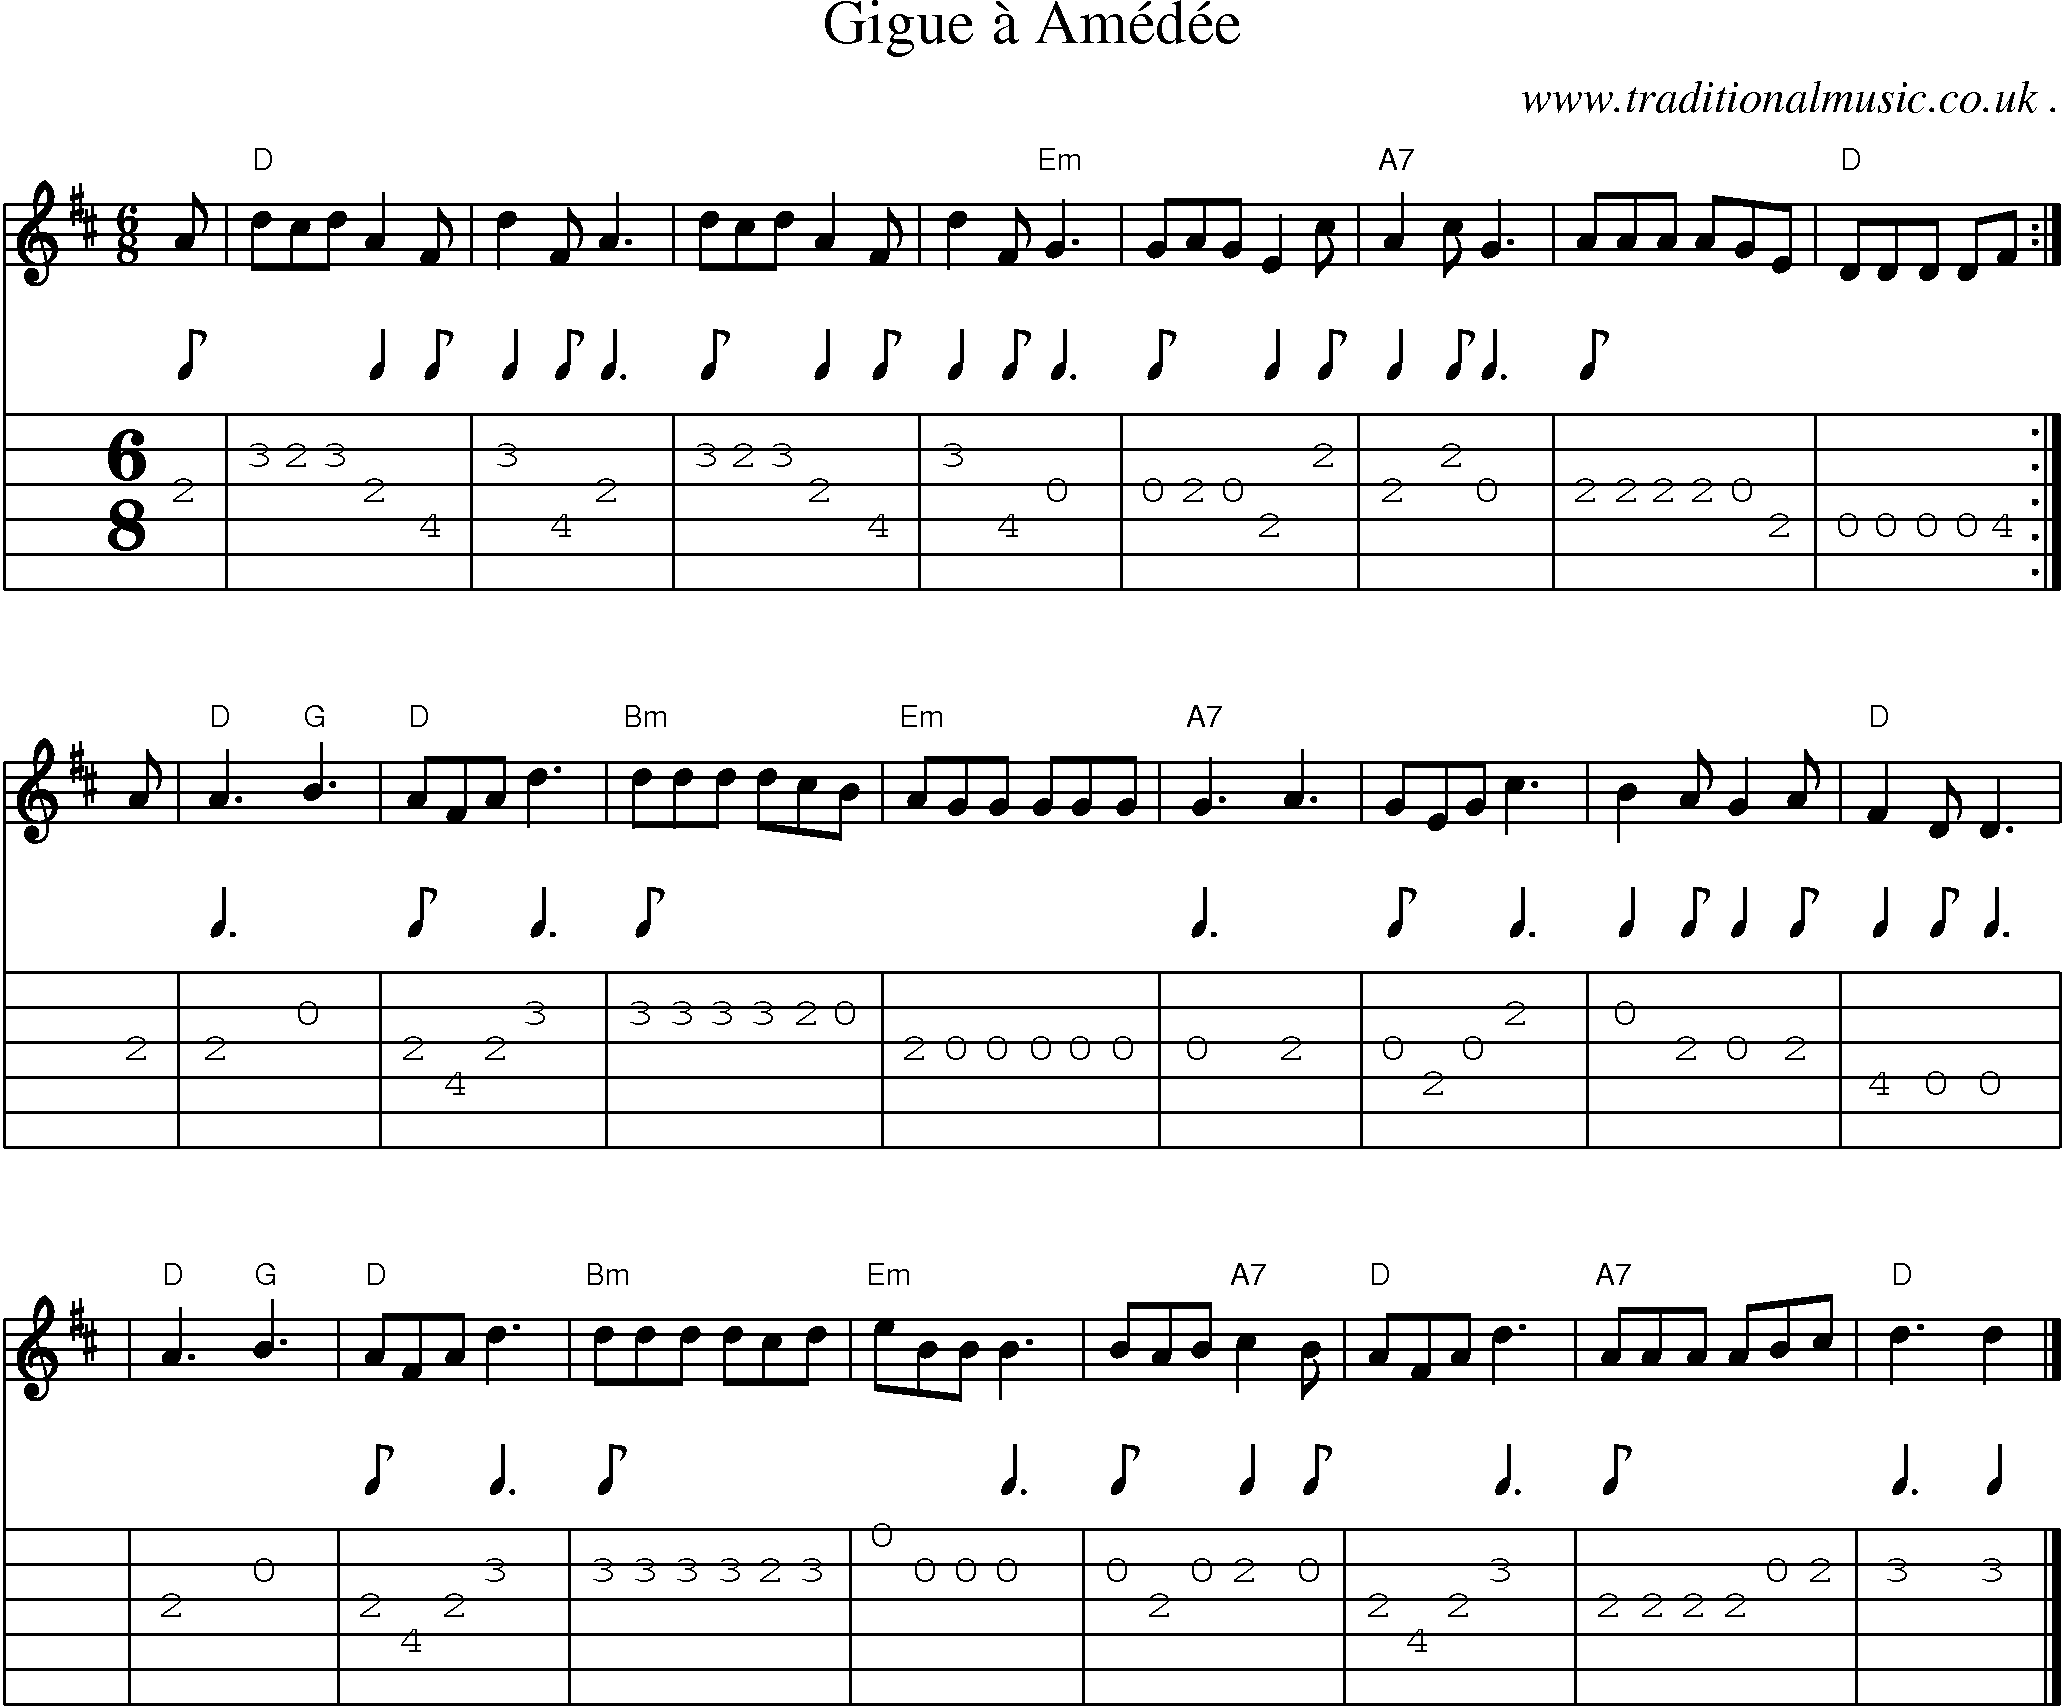 Sheet-music  score, Chords and Guitar Tabs for Gigue A Amedee